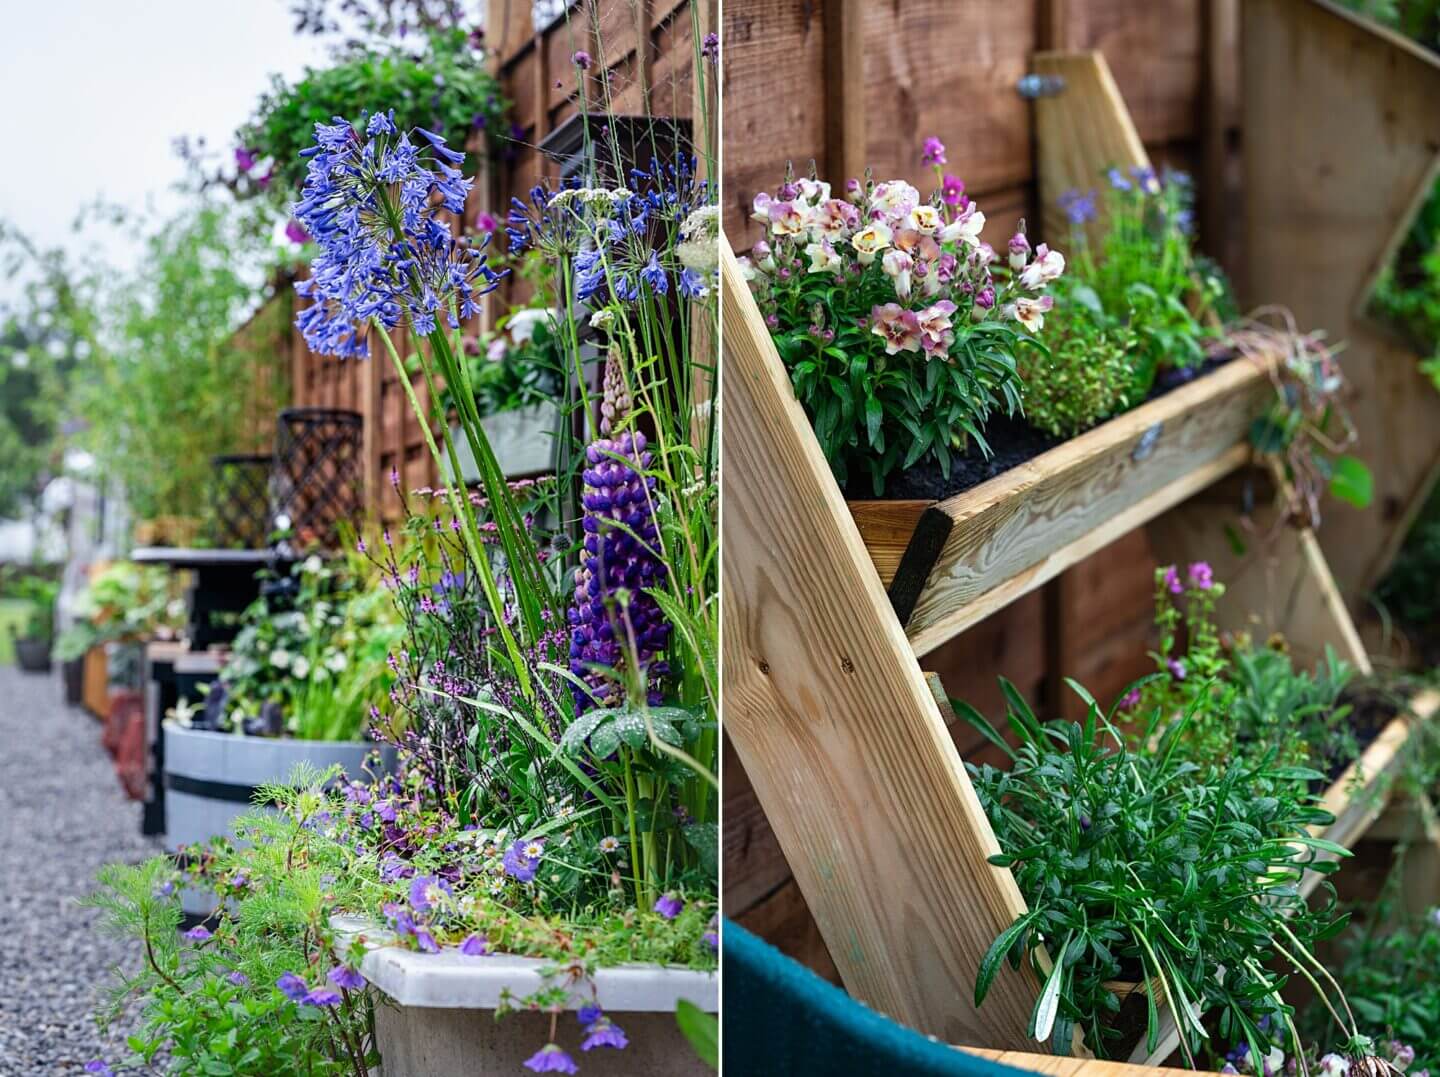 Reclaimed and repurposed materials as garden planters